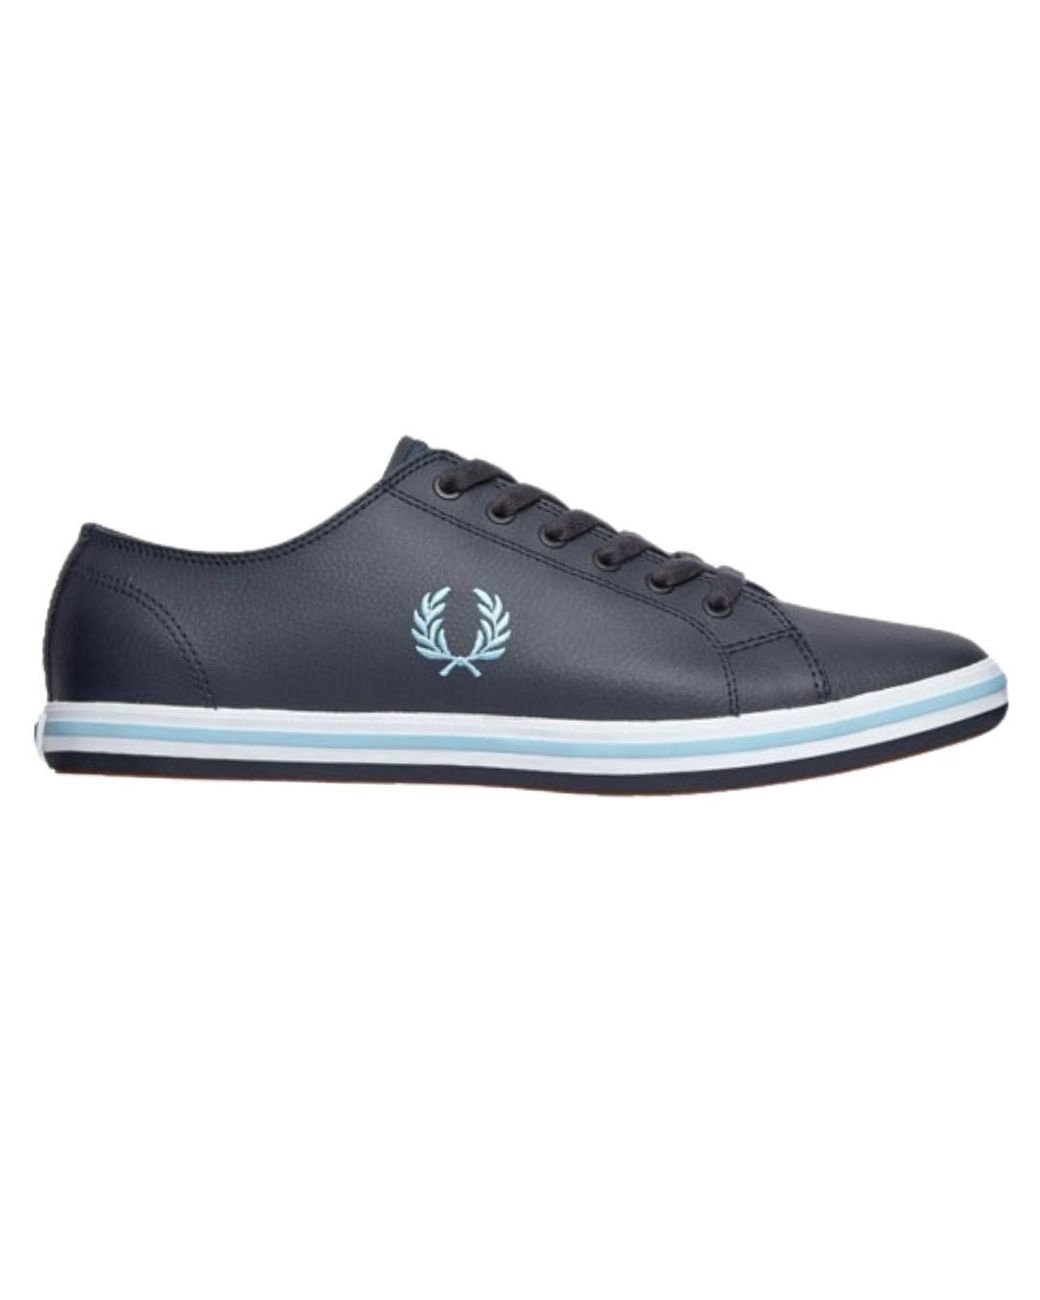 Fred Perry Kingston Leather B7163 608 Navy Blue Trainers for Men | Lyst UK